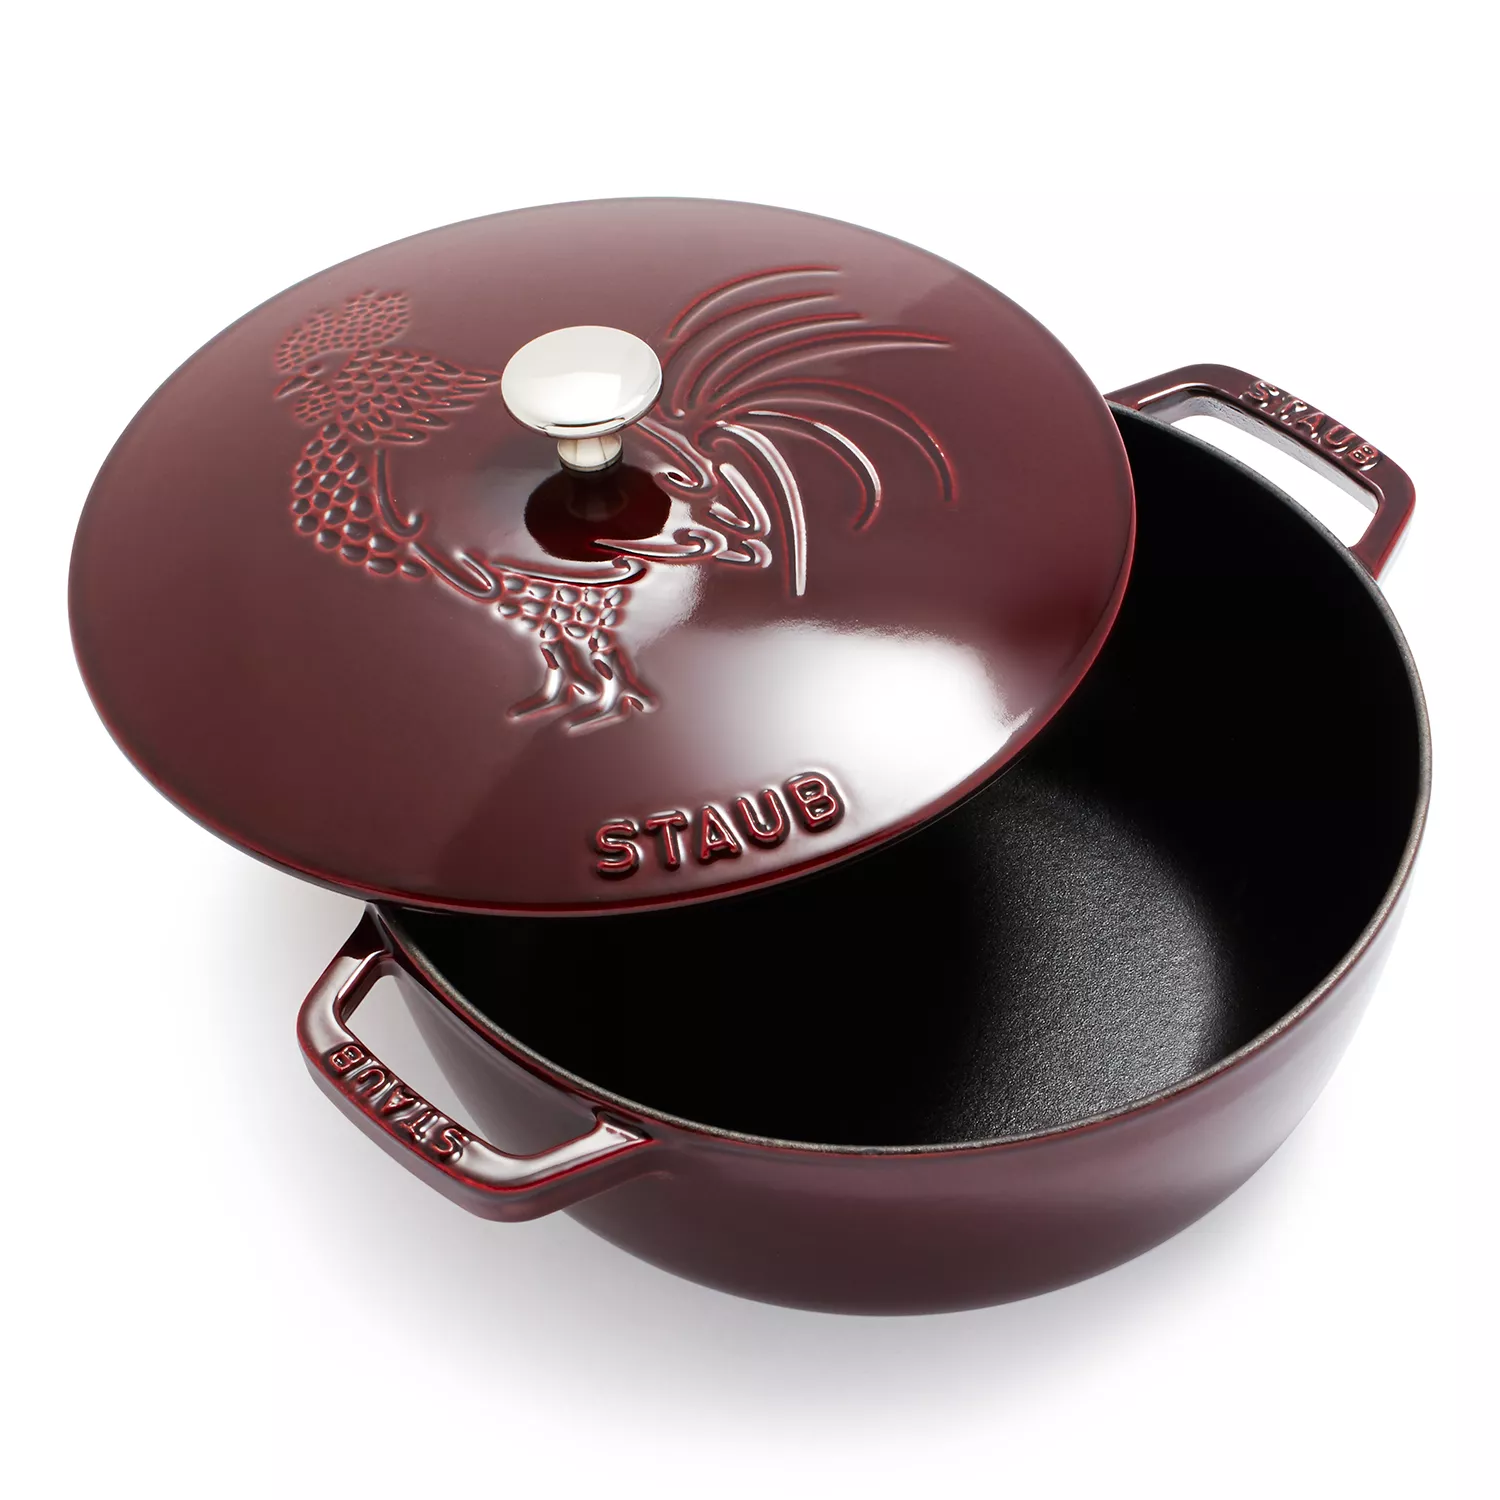 STAUB Tools in 2023  Staub, Enameled cast iron cookware, Kitchen must haves